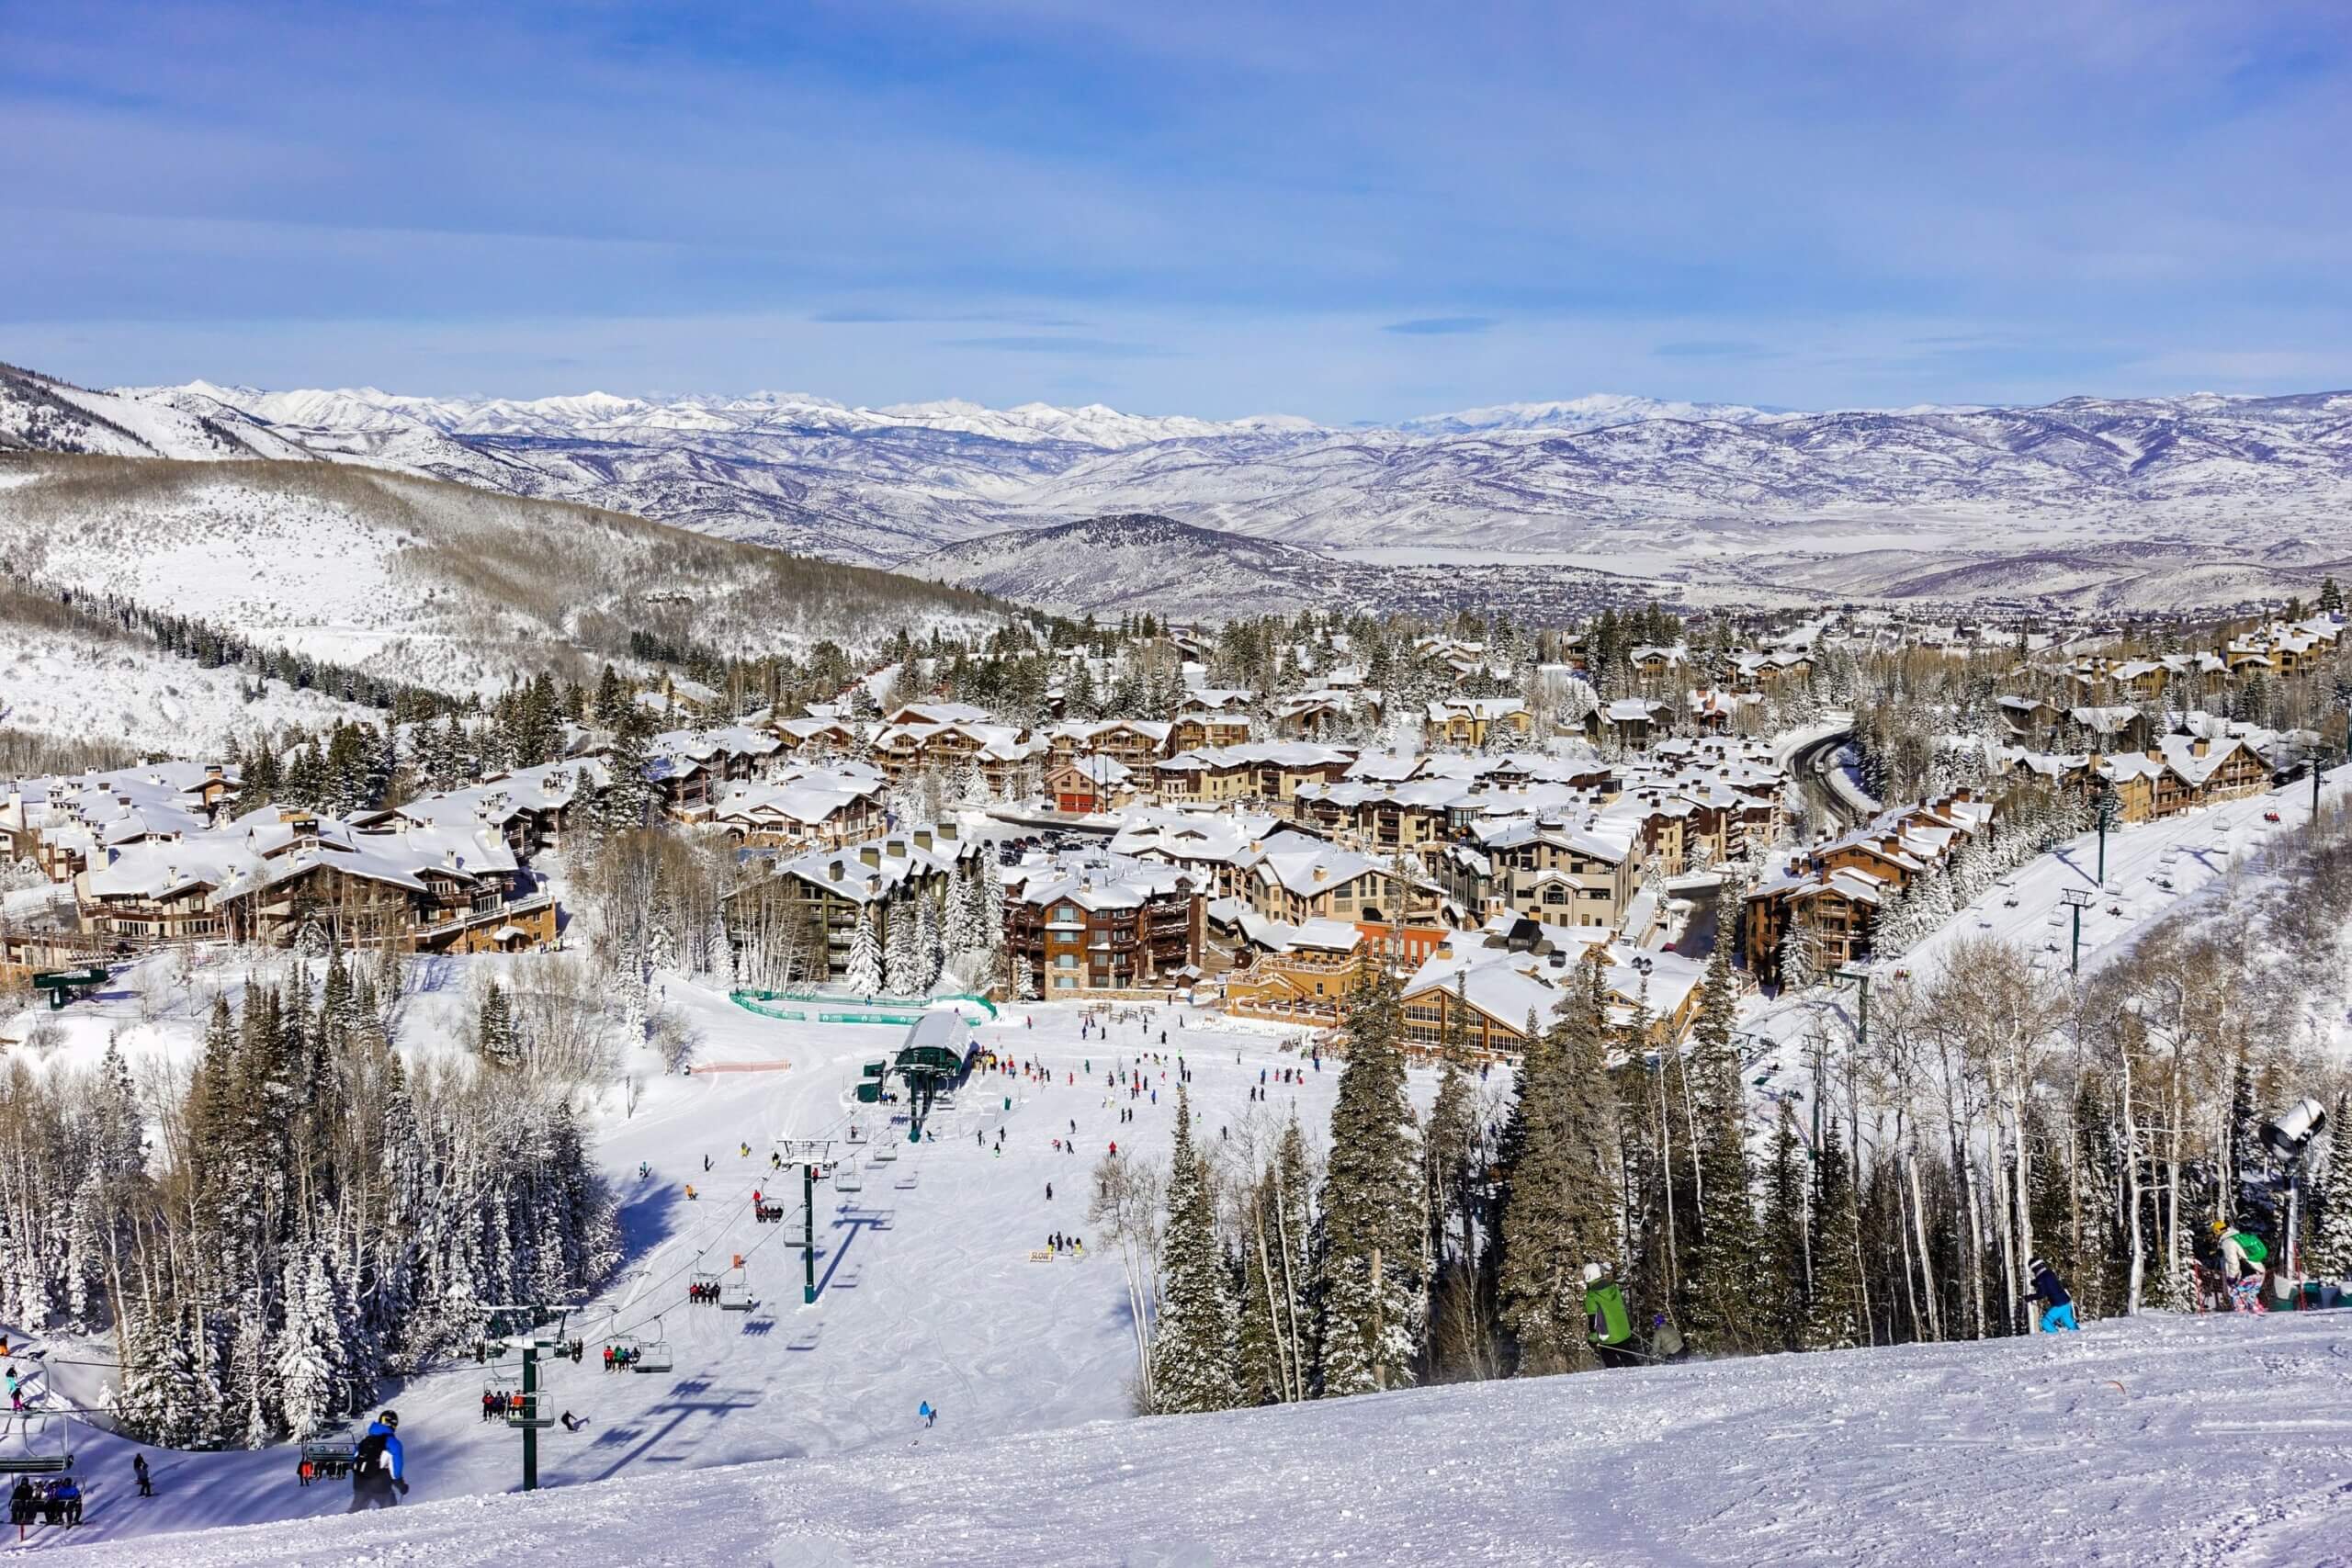 Private Jet to Park City, Utah for Late Season Skiing